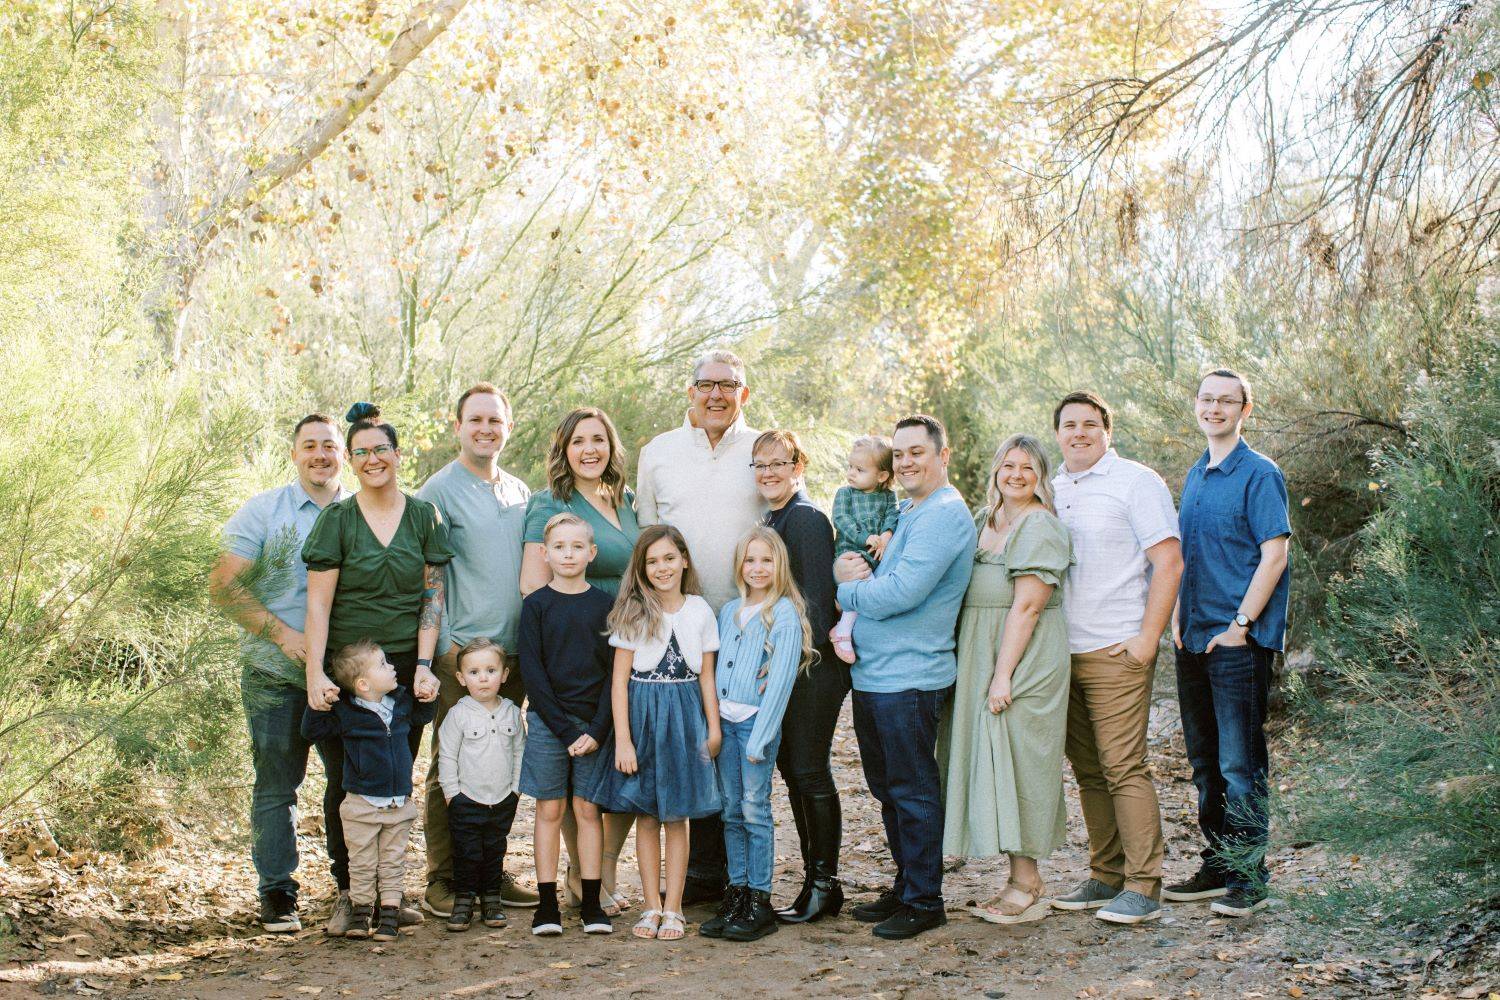 The couple has a blended family with five children total, and "having grandchildren is amazing," Paul said.